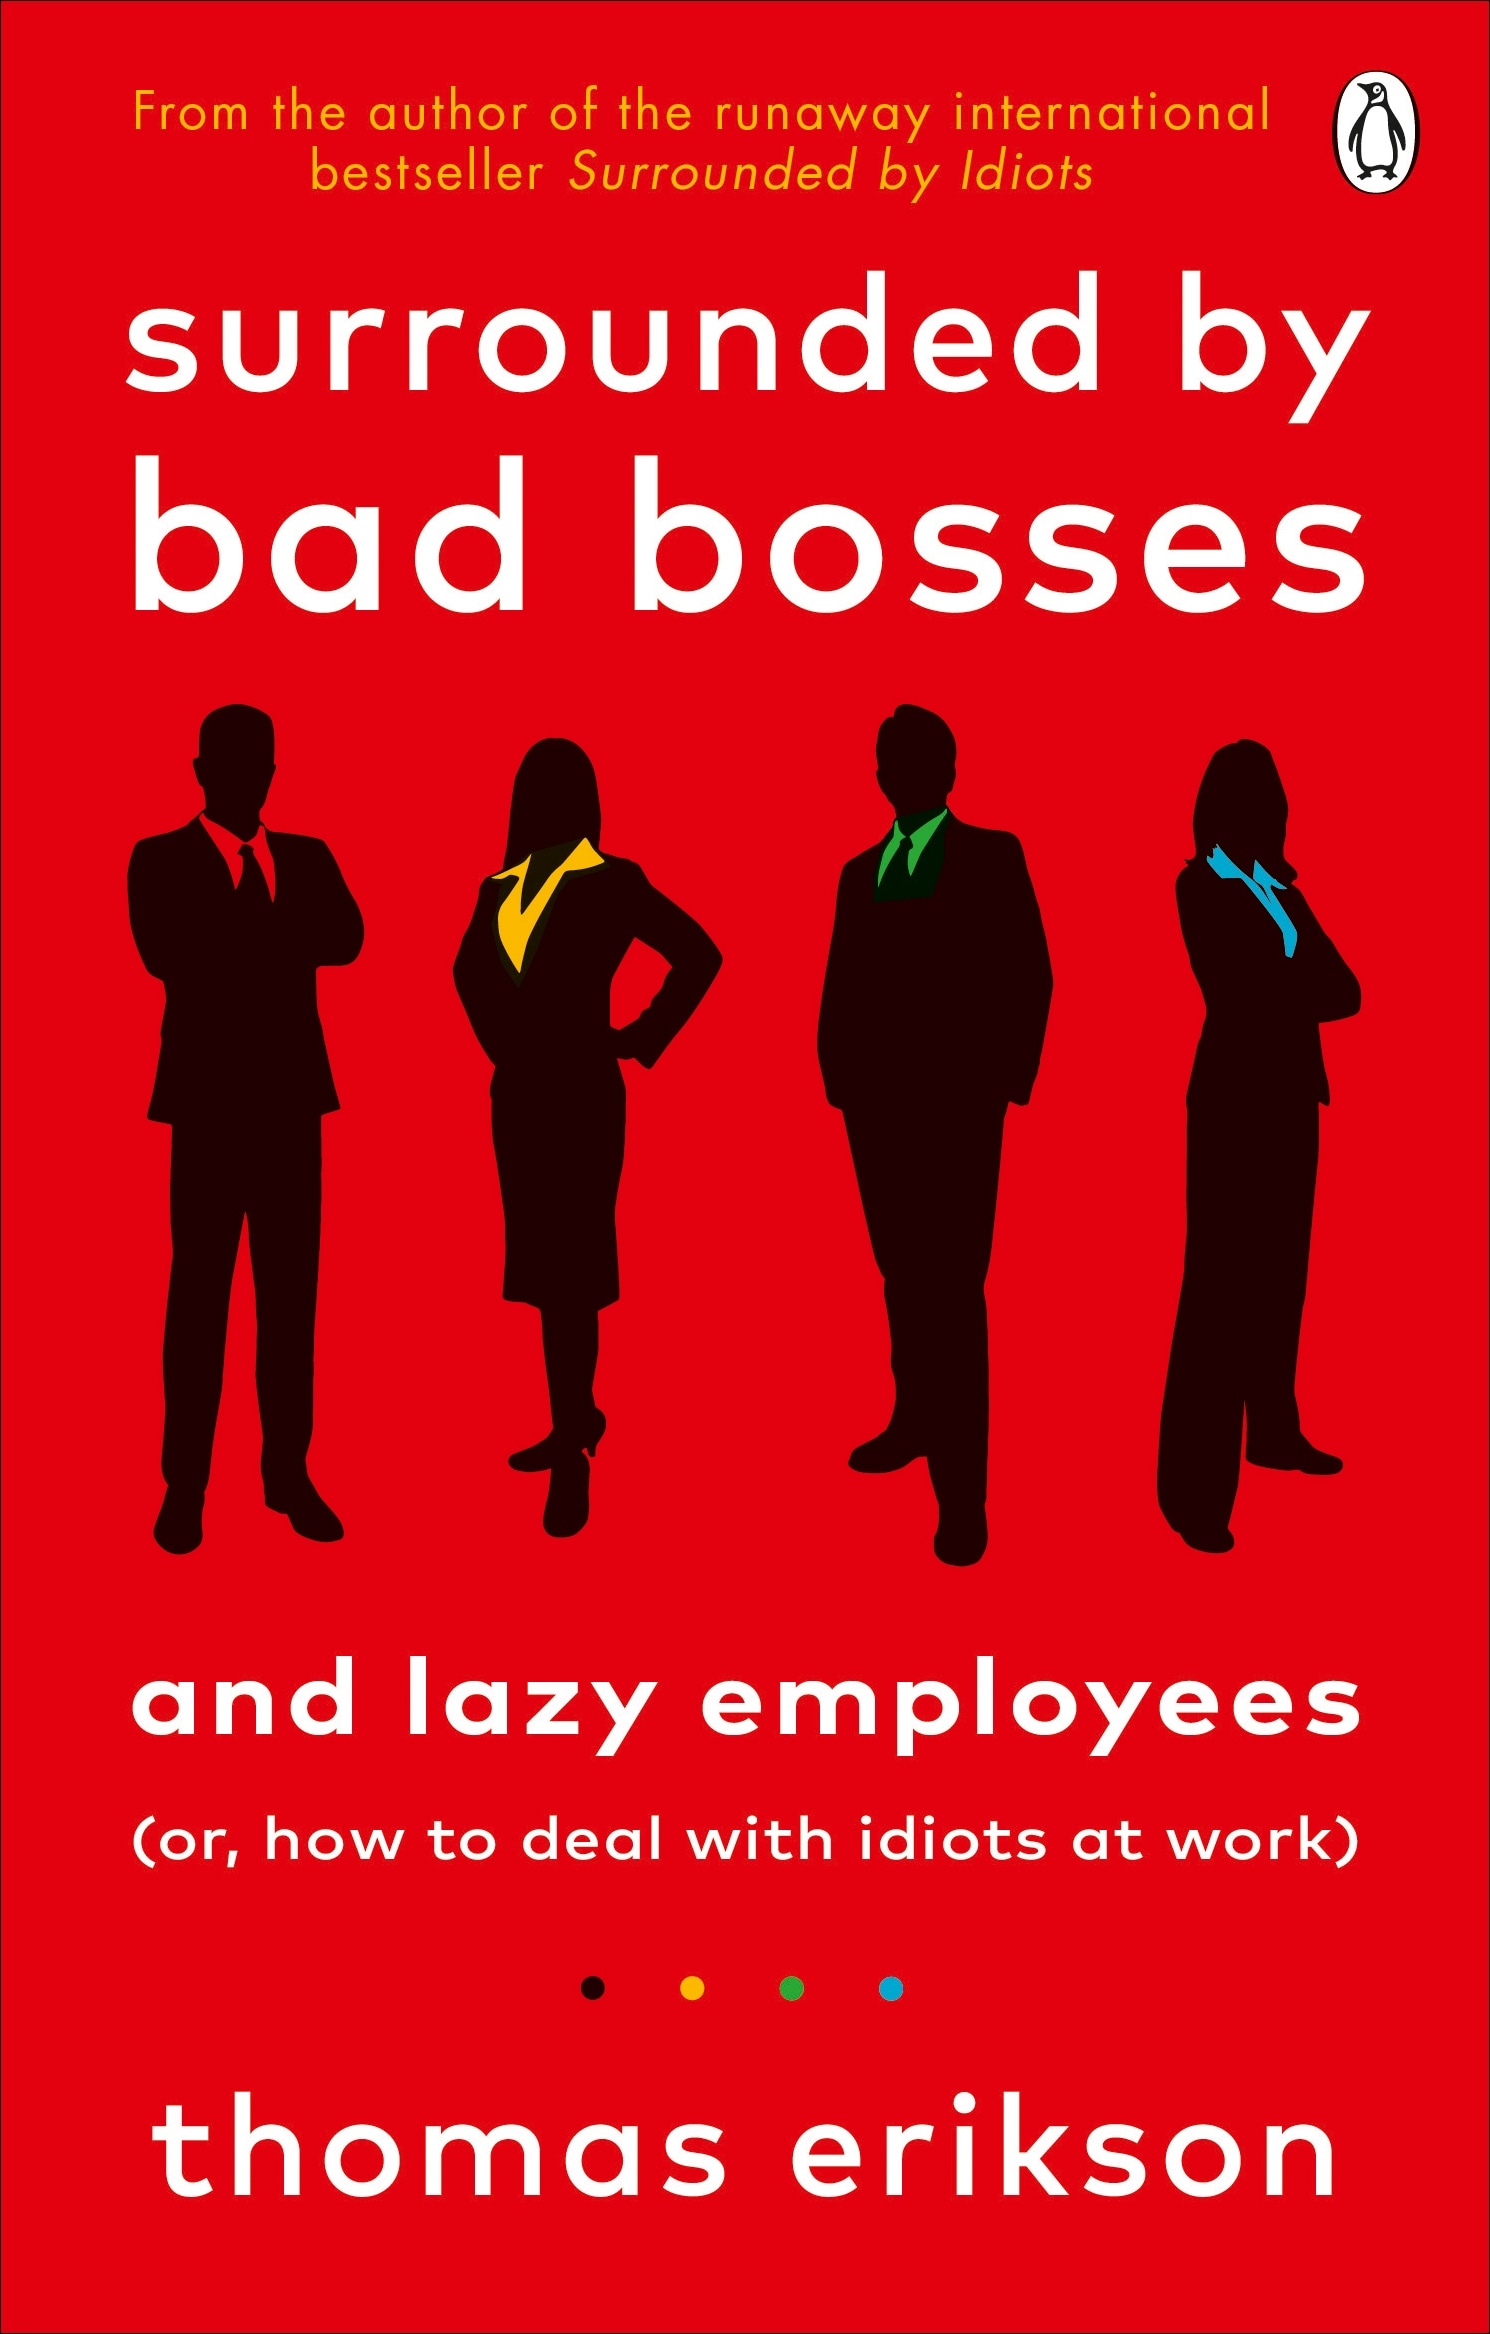 Book “Surrounded by Bad Bosses and Lazy Employees” by Thomas Erikson — August 17, 2021